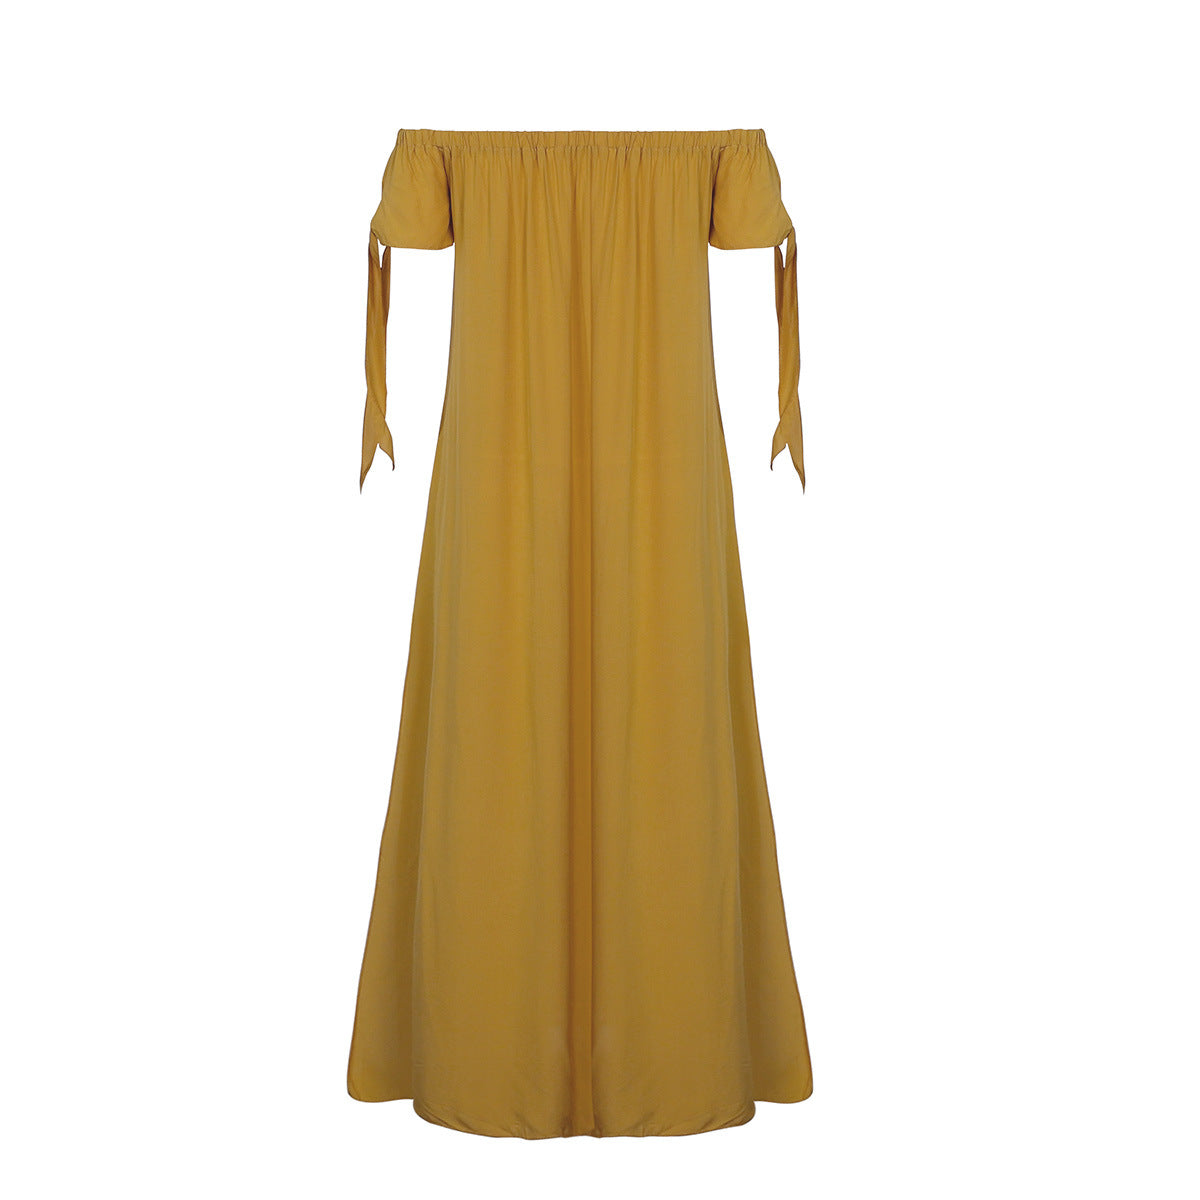 A yellow Summer Straight Shoulder Split Beach Dress by Beachy Cover Ups on a mannequin.